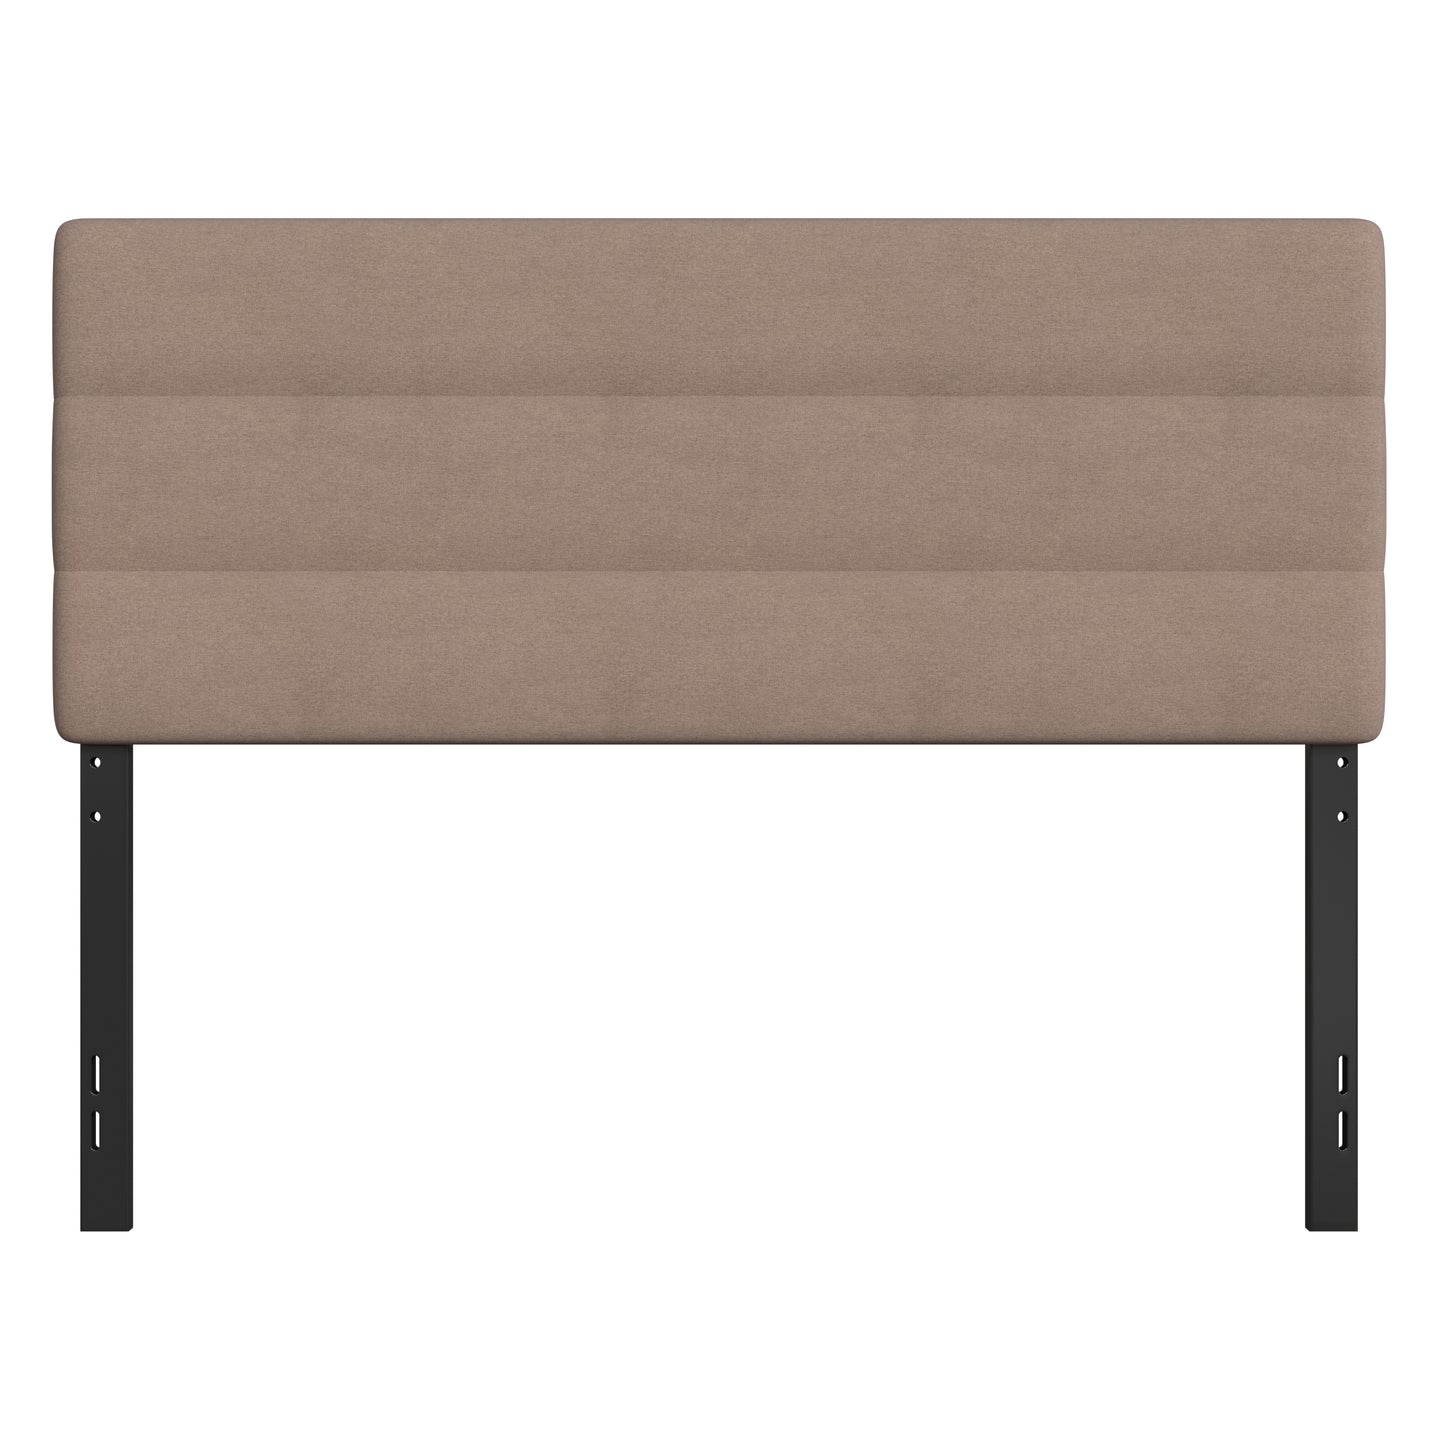 Taupe Tufted Queen Headboard TW-3WLHB21-TAN-Q-GG